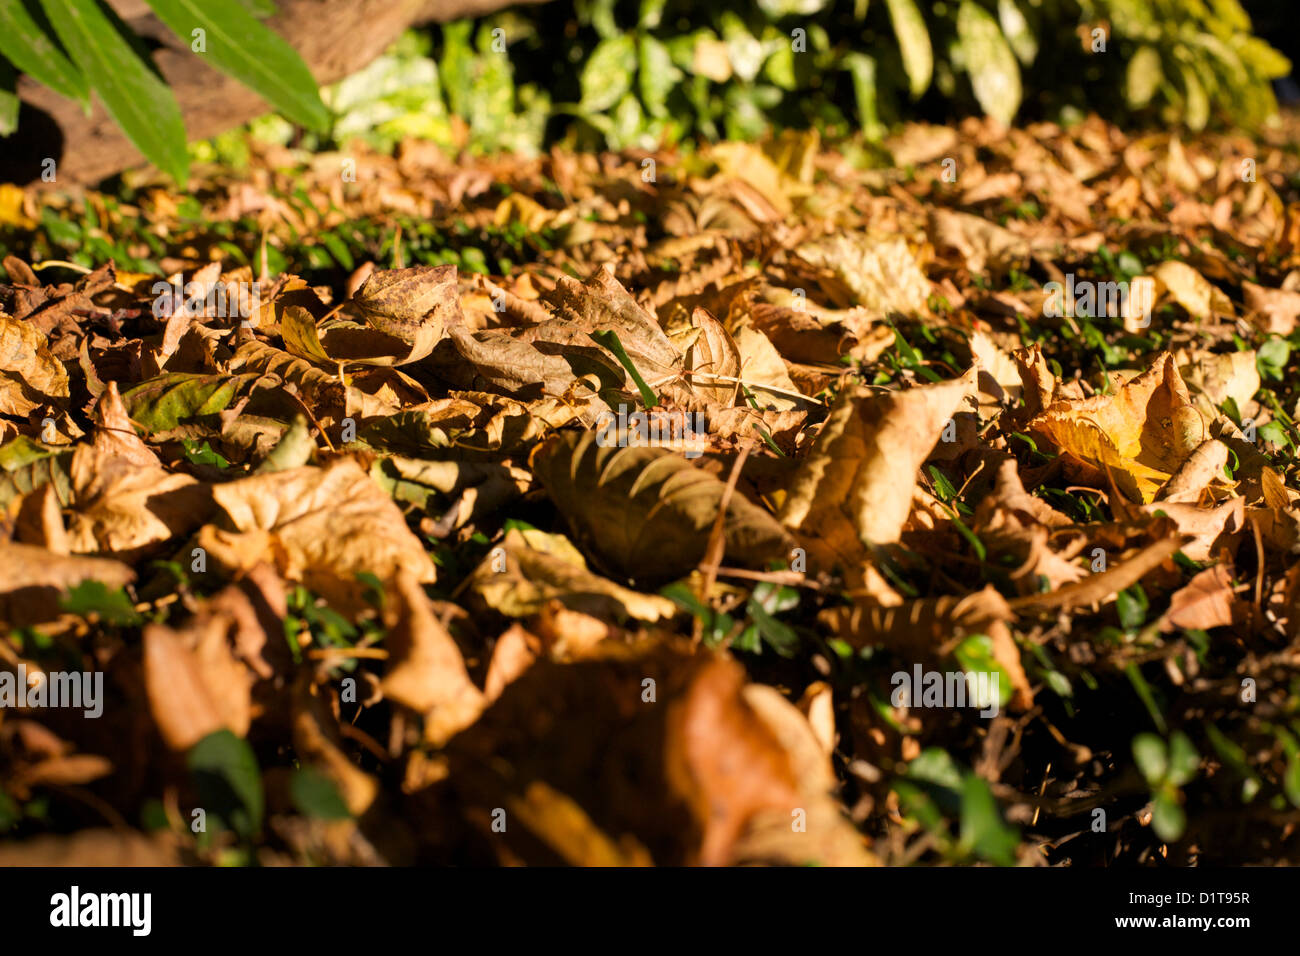 Autumn leaves on ground with bush in background Stock Photo